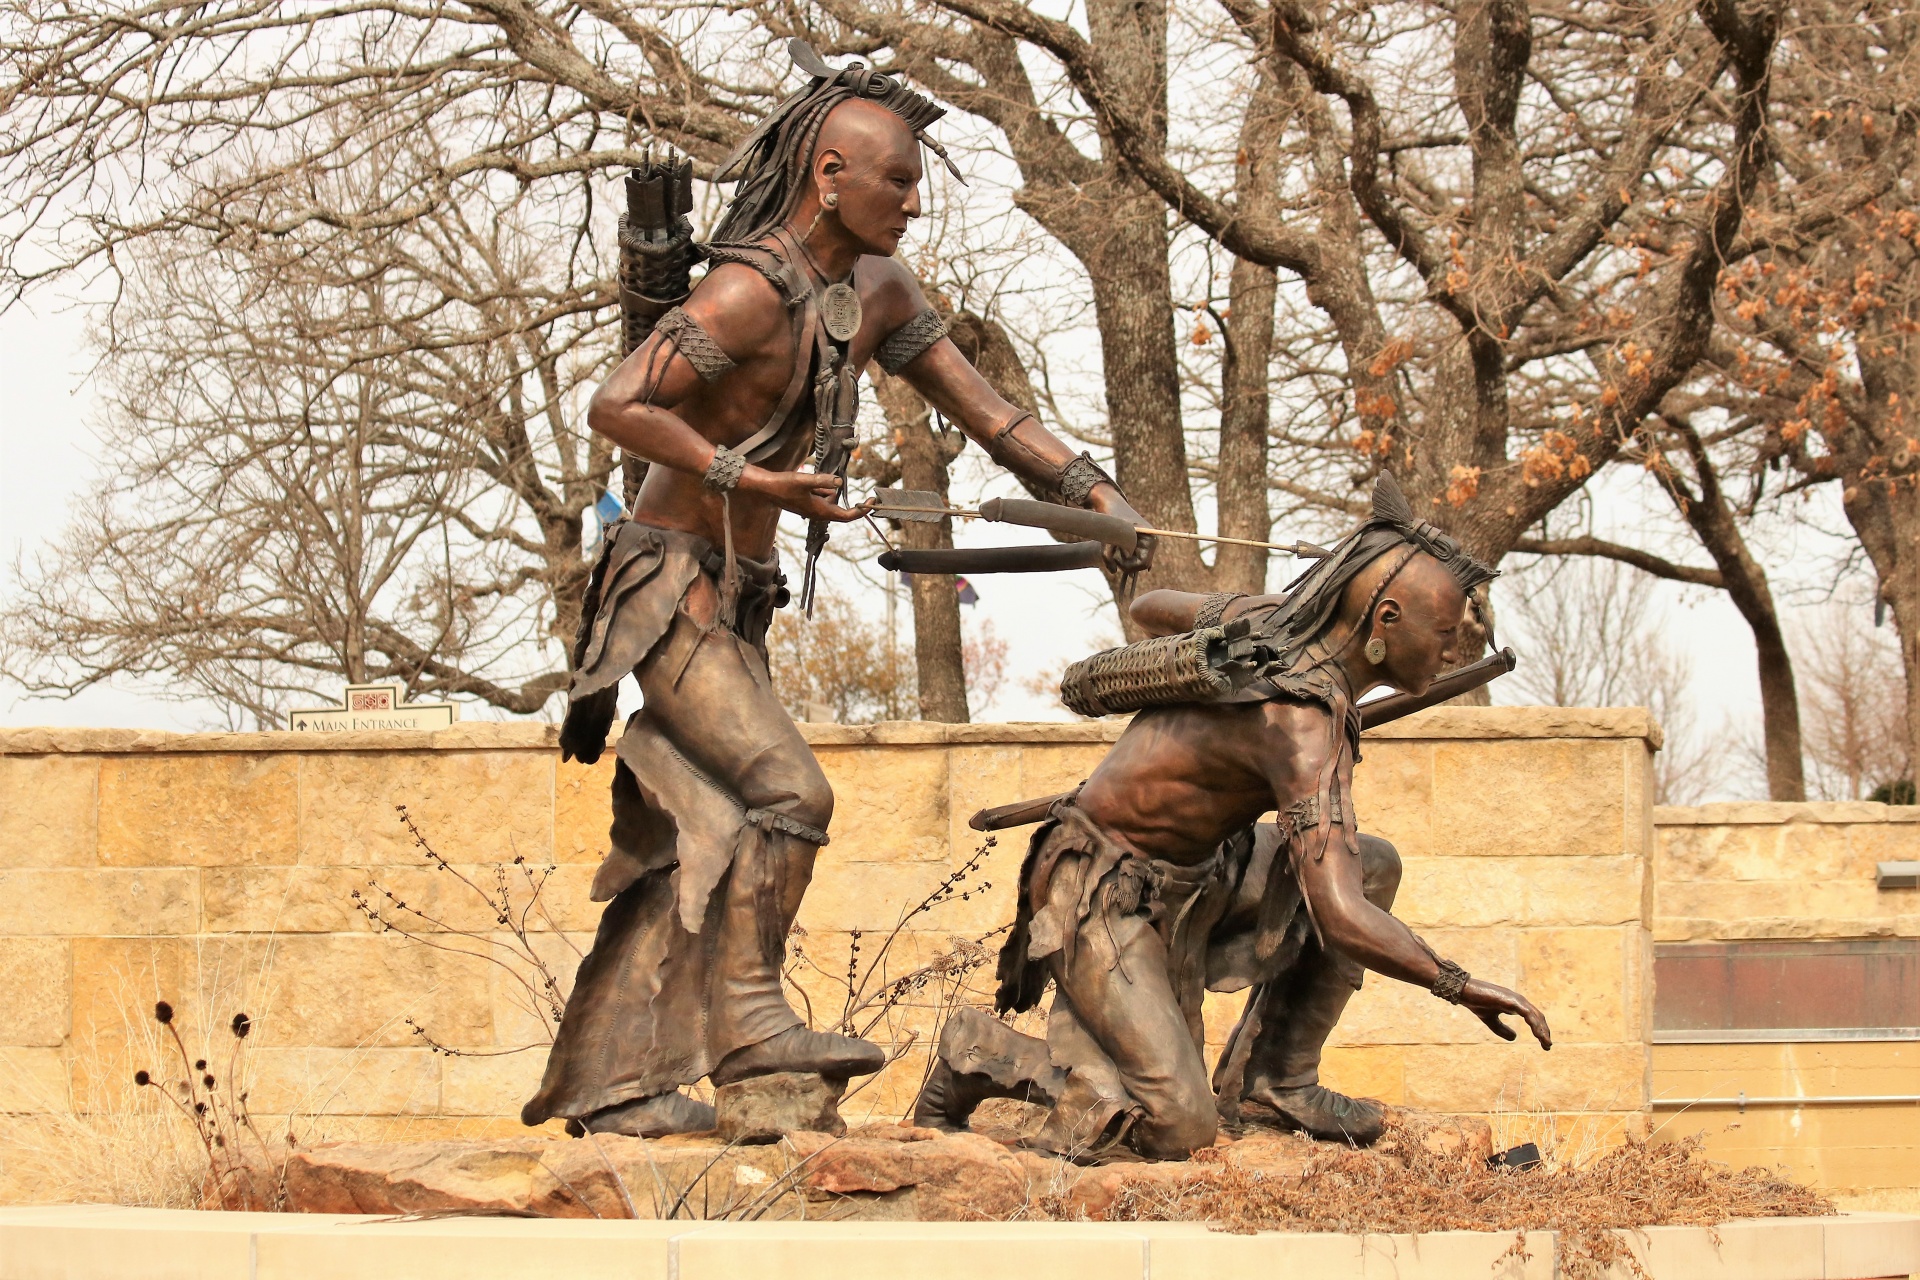 Two Native American Chickasaw warriors hunting sculptures at the Chickasaw Cultural Center in Sulphur, Oklahoma.